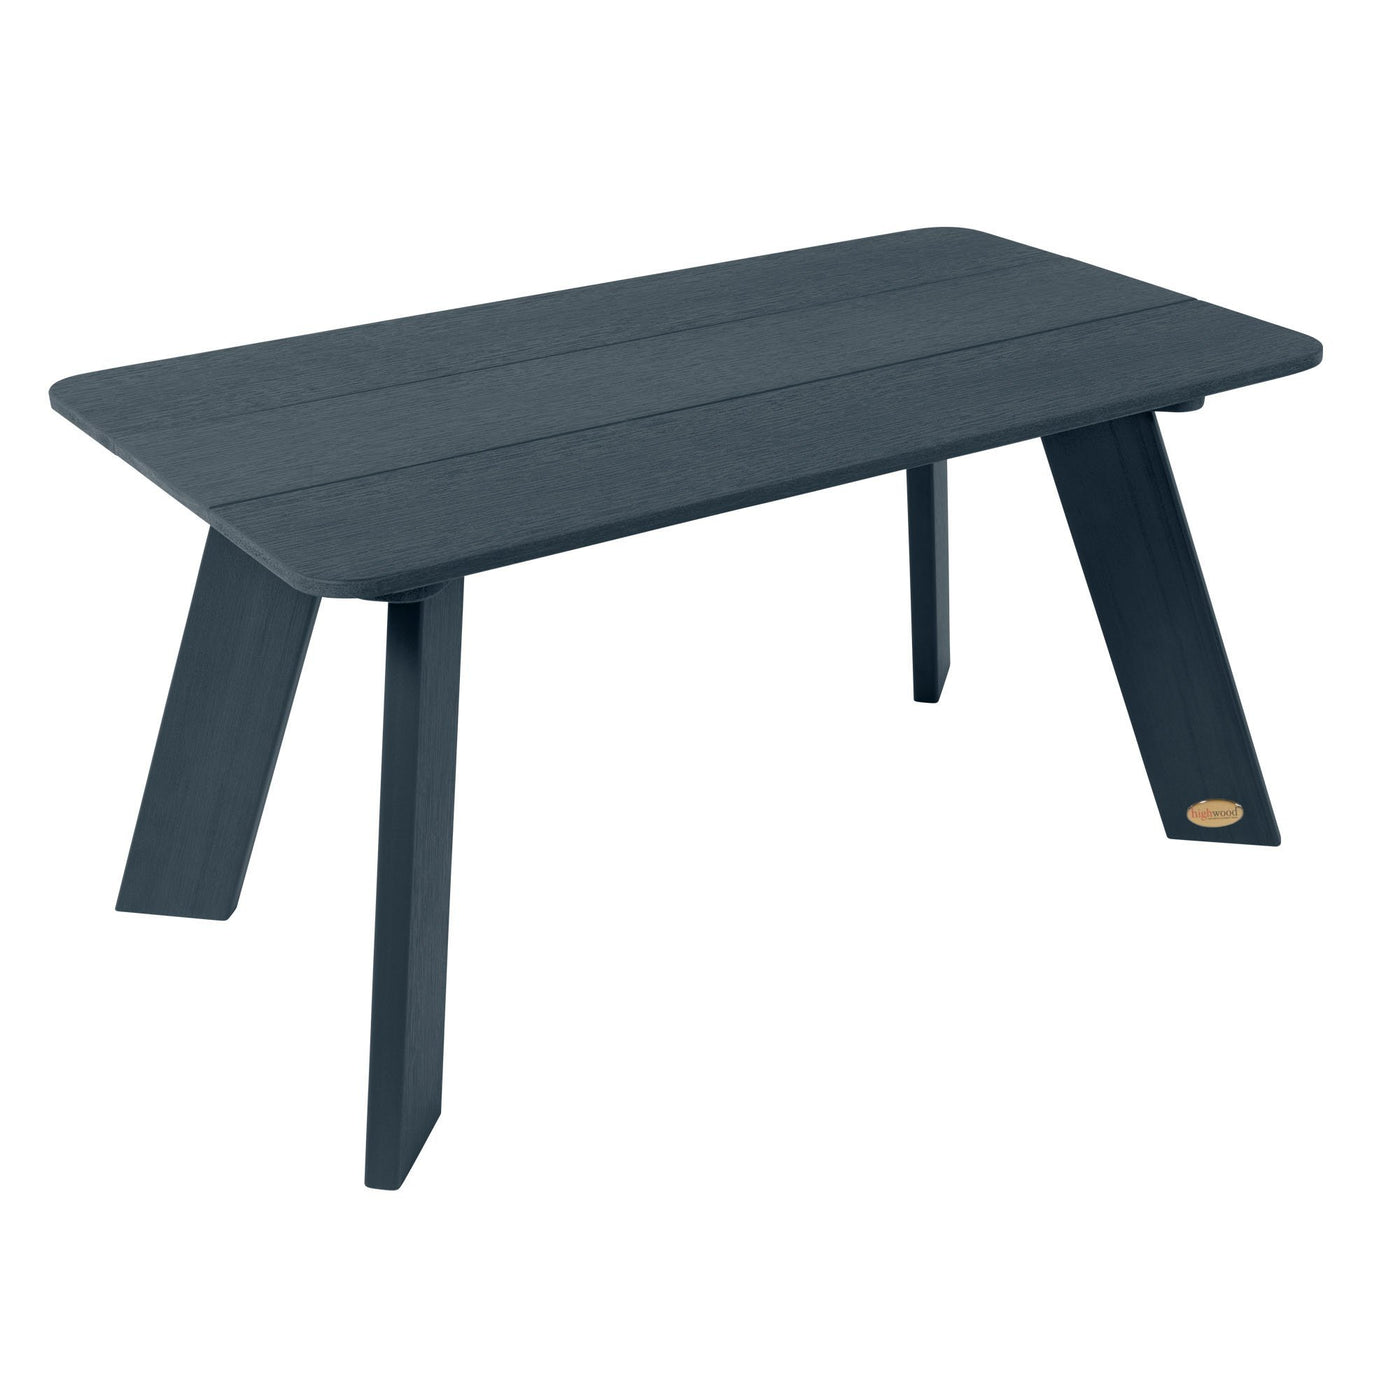 Italica Modern Conversation table in Federal Blue 